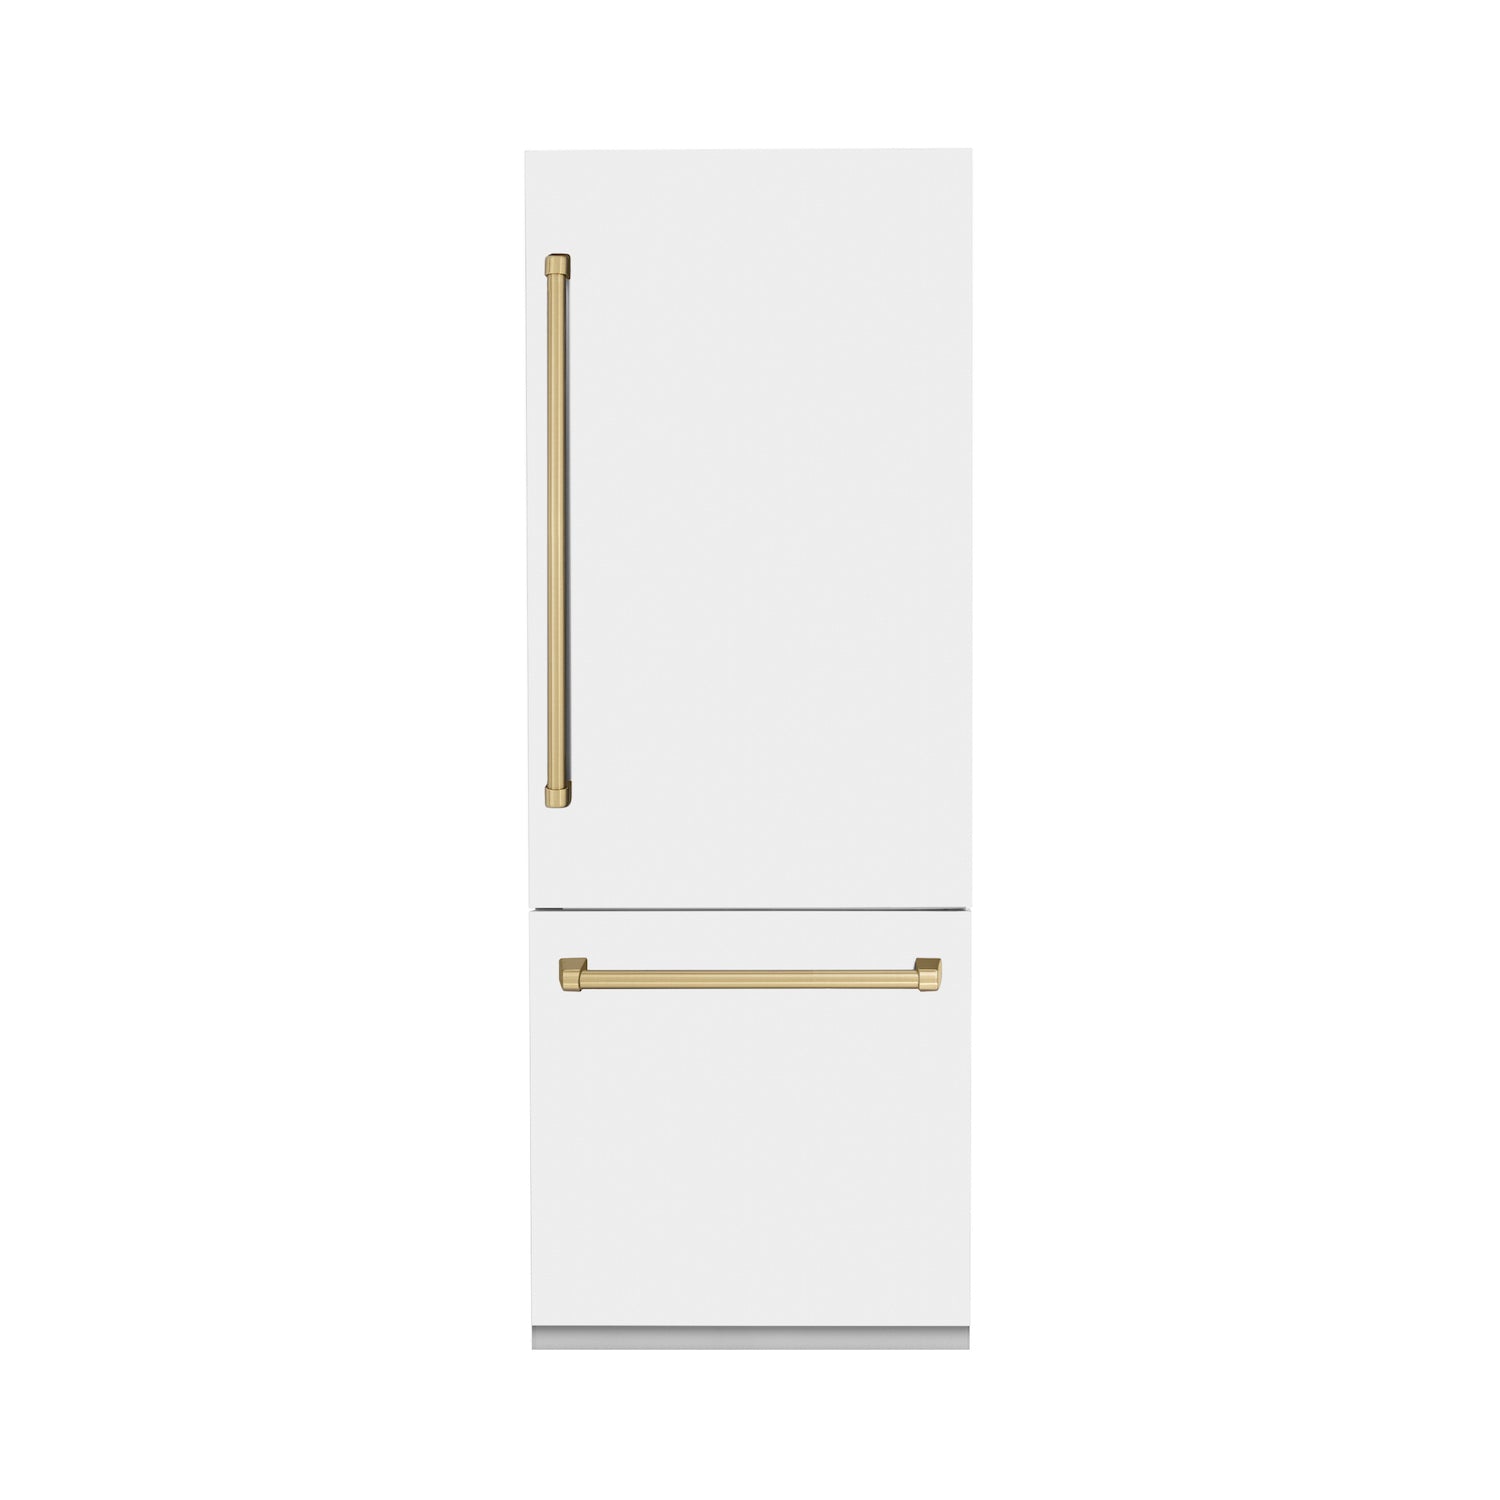 ZLINE Autograph Edition 30" Built-in White Matte Refrigerator with Champagne Bronze Accents front.